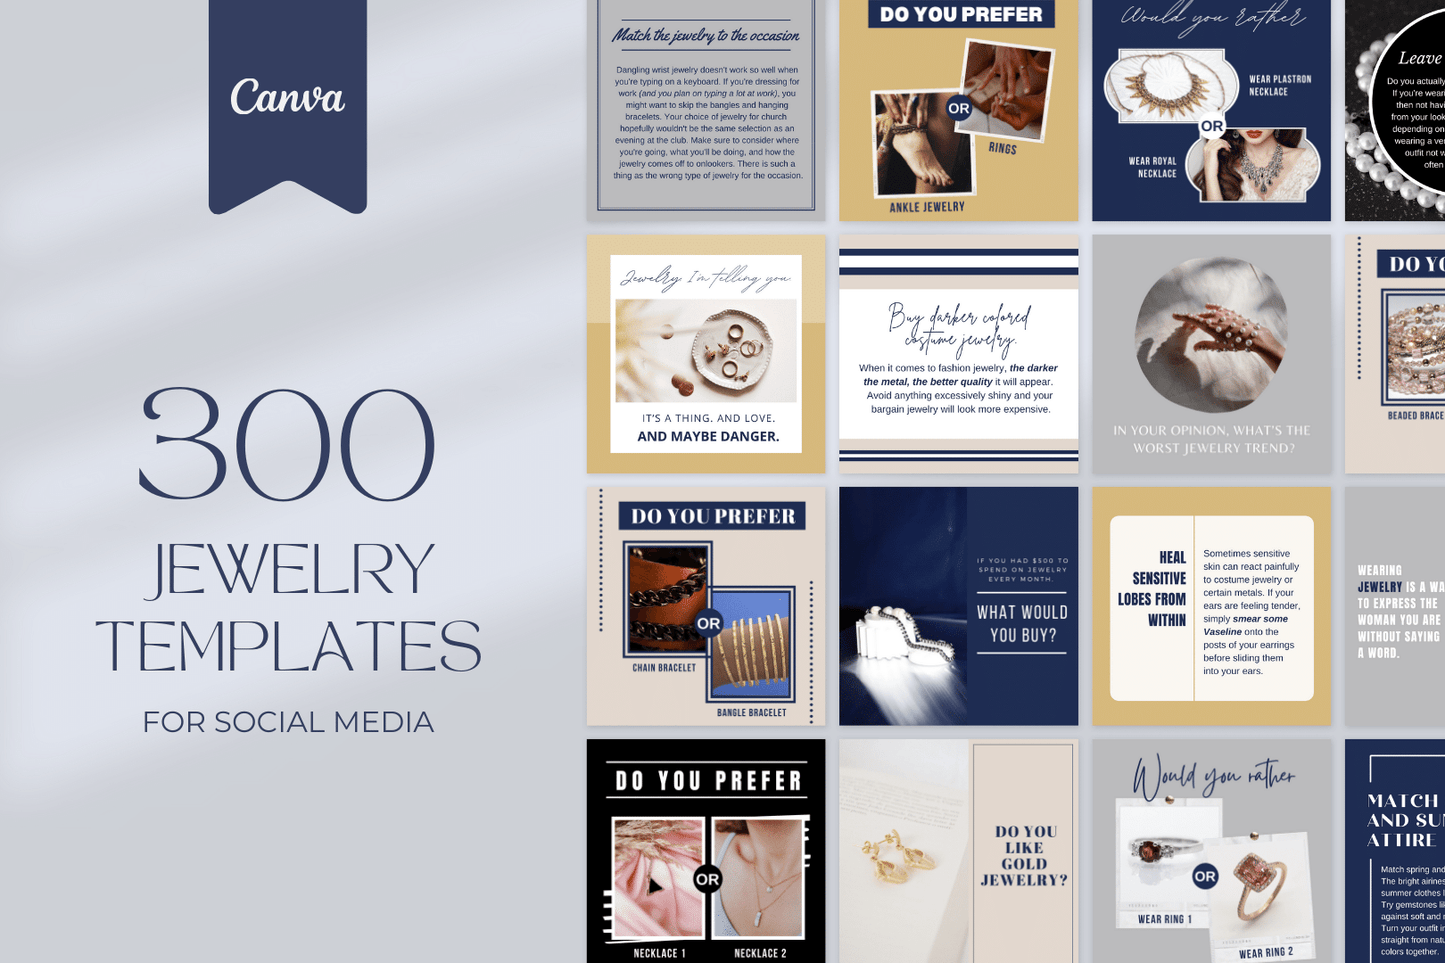 300 Jewelry Templates for Social Media